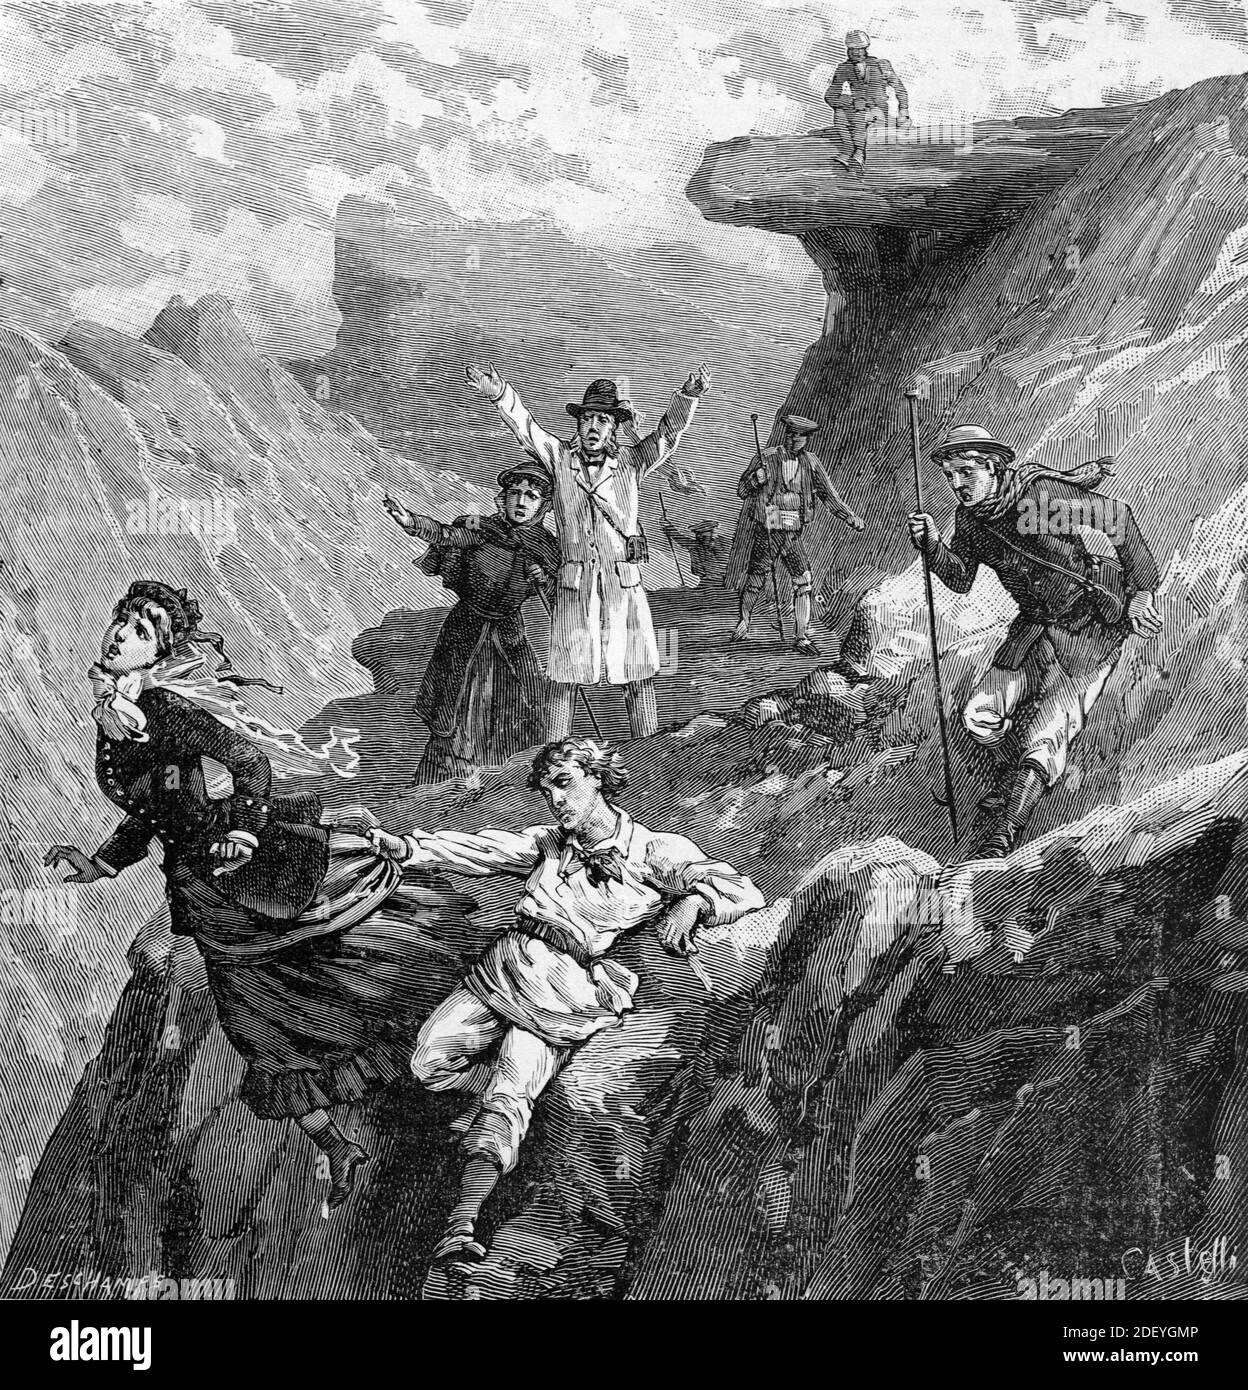 Walking Accident or Tragedy on Mount Puy de Sancy, the Highest Mountain in the Massif Central Puy-de-Dôme France (Engr Castelli, 1884) Vintage Engraving or Illustration Stock Photo